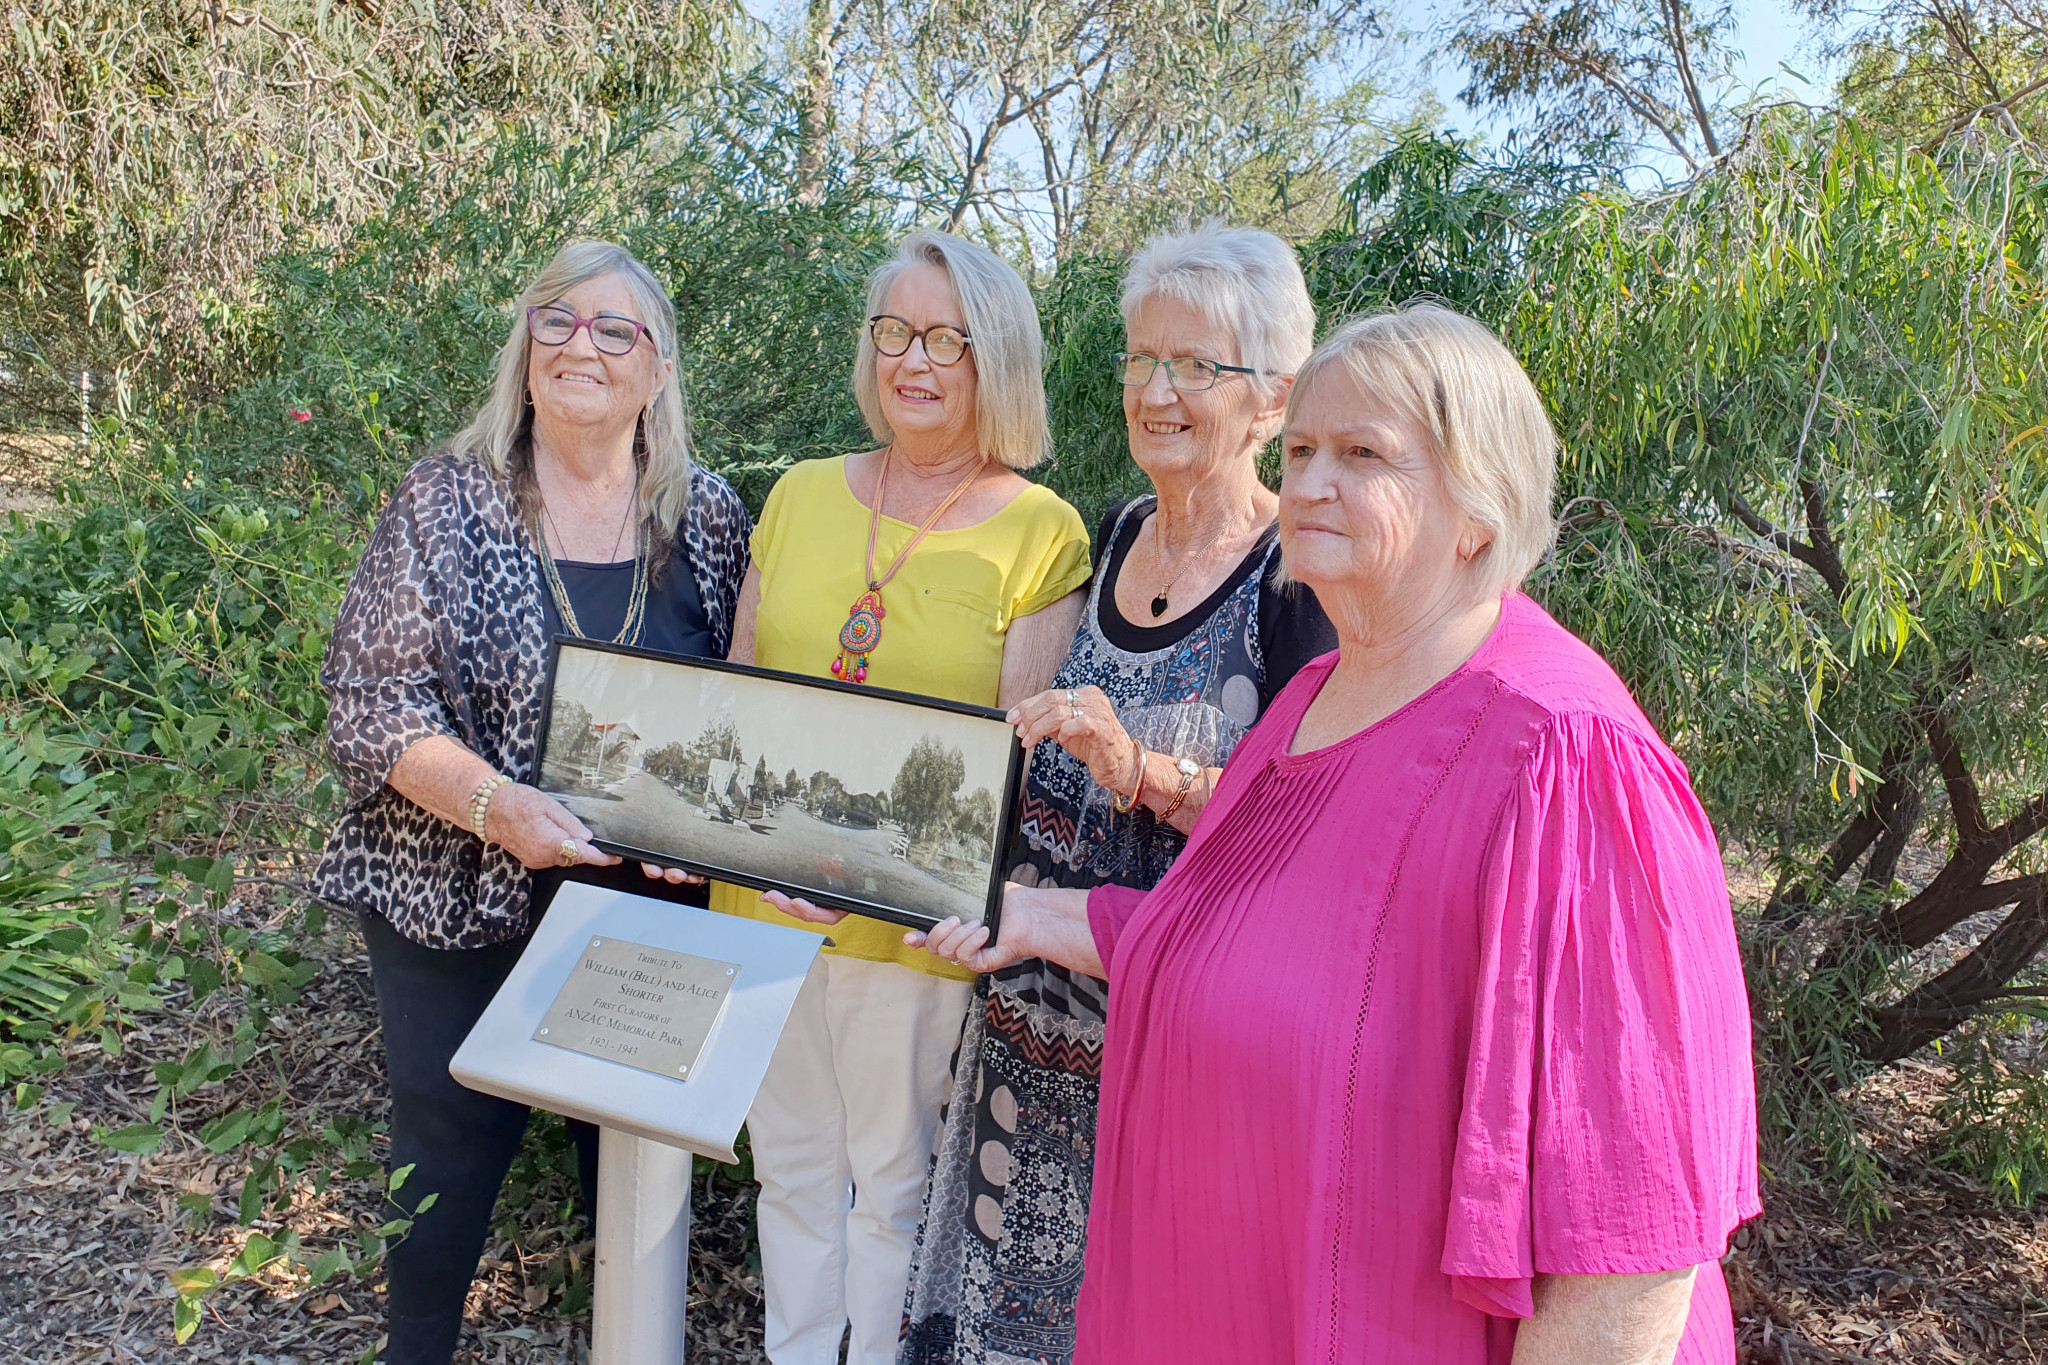 Mr and Mrs Shorter's granddaughters, Glynnice Fraser, Barbara McLean, Julie McLean and Meryl Bullock, gather at Anzac Park to unveil a plaque to recognise their grandfather's service.